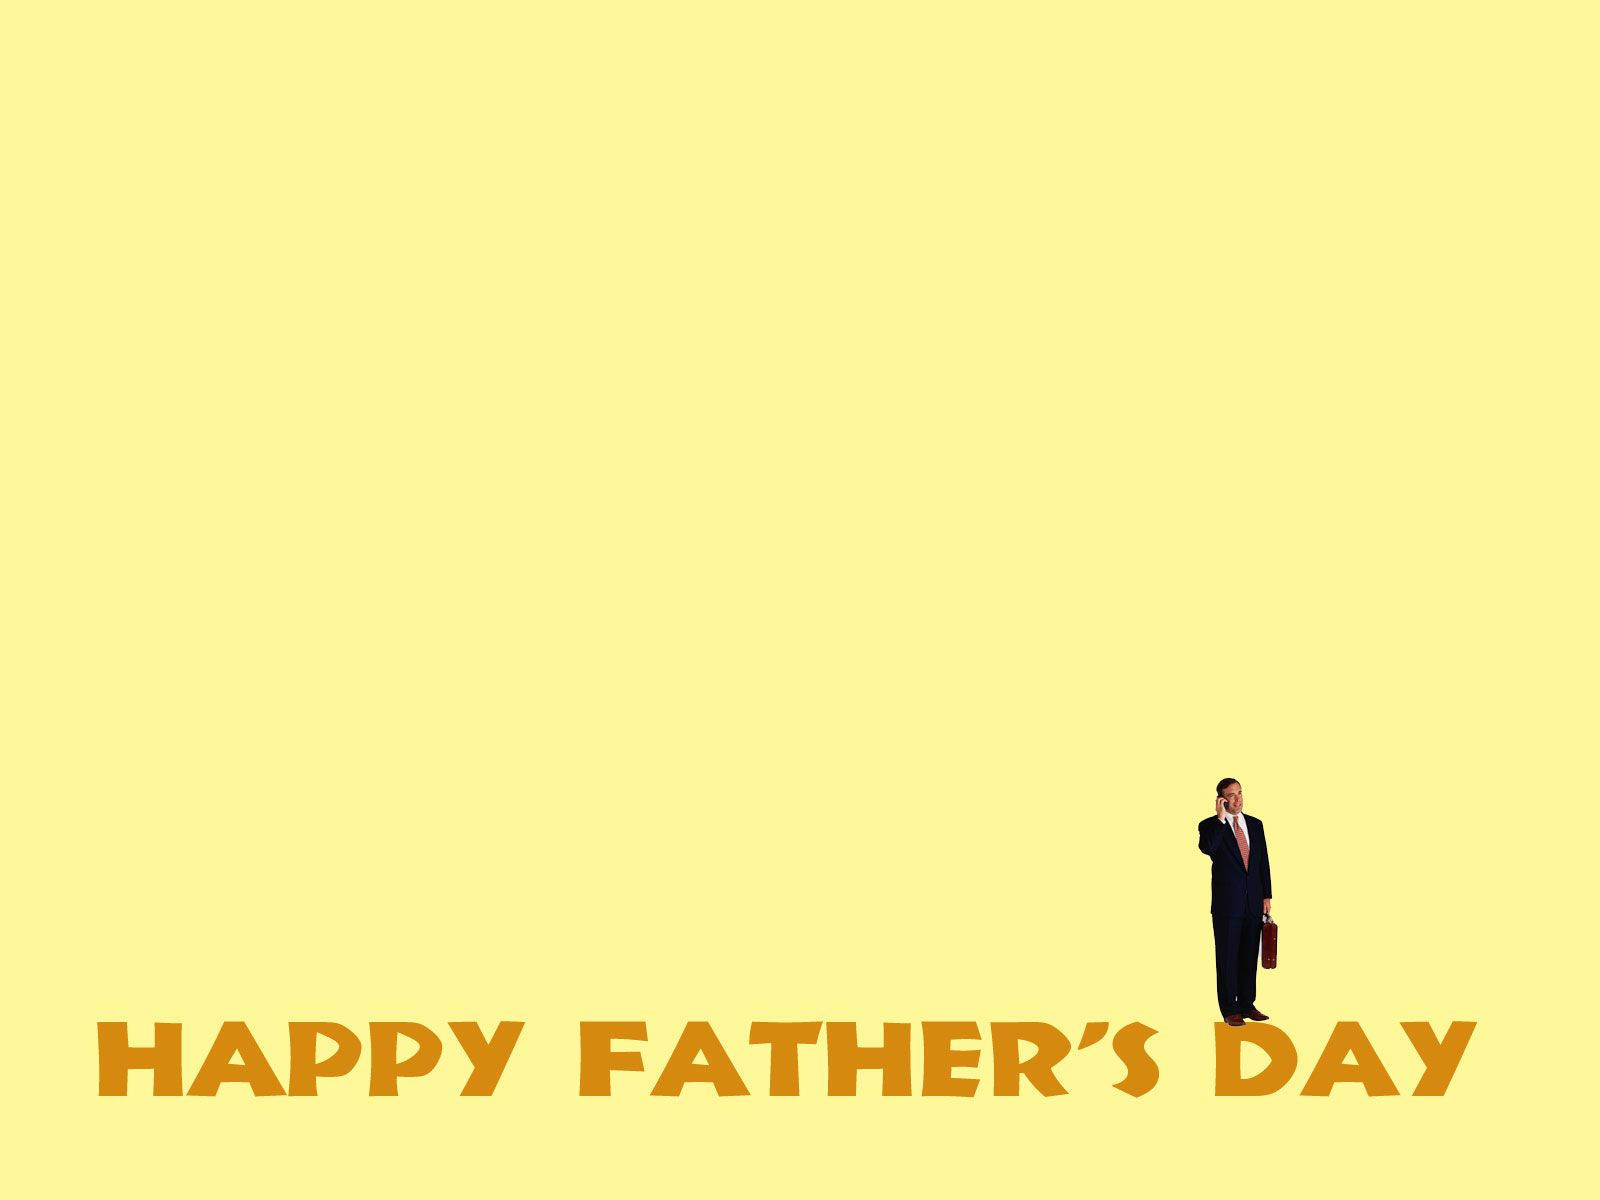 Celebrate Dad This Father's Day! Background